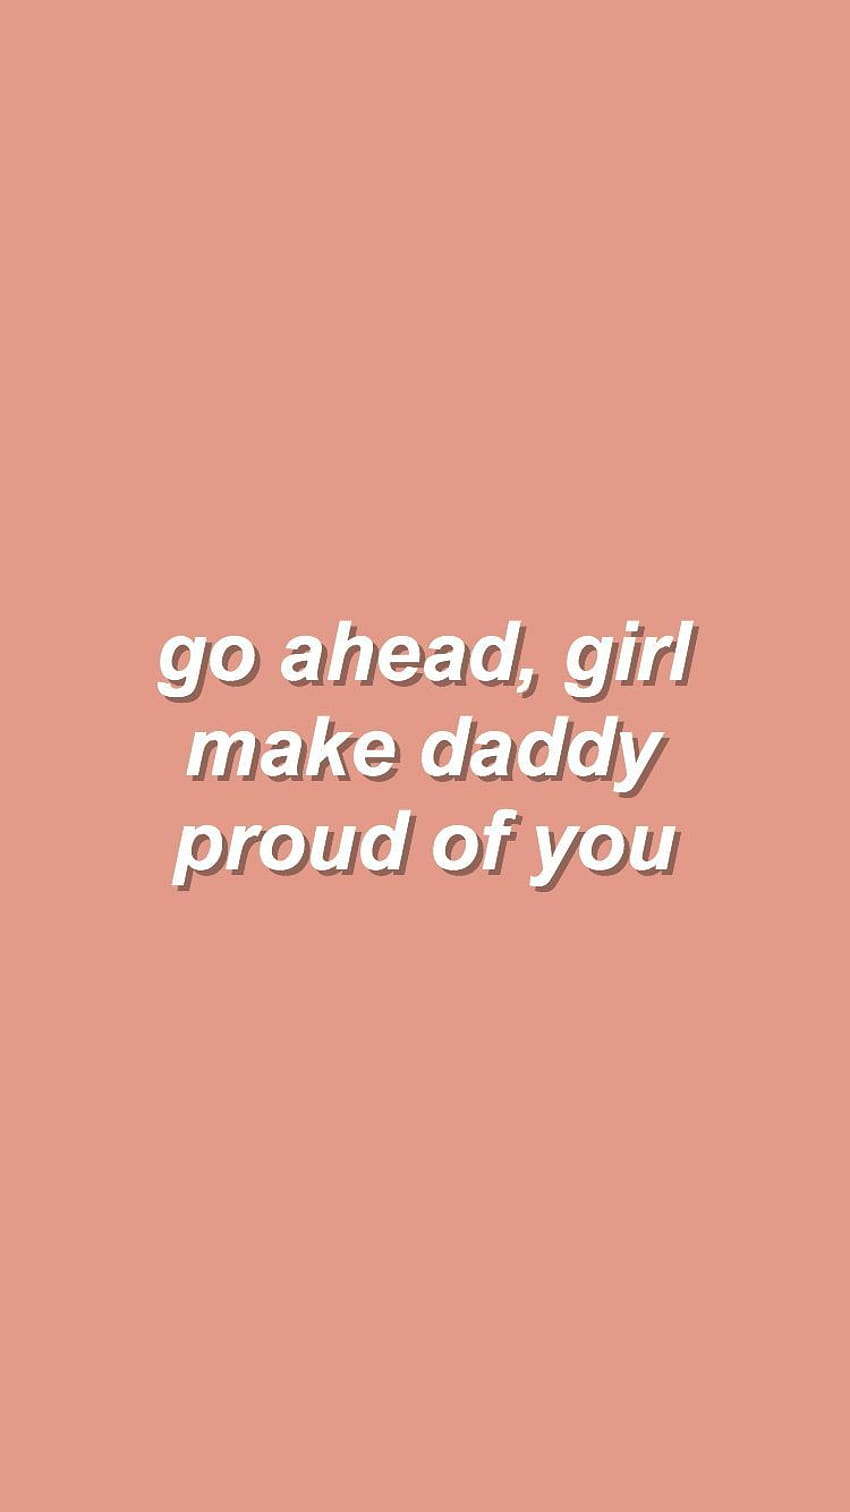 Tumblr quotes daddy You yes you the daddy domtumblrcom are mune 28 flirty sassy HD phone wallpaper